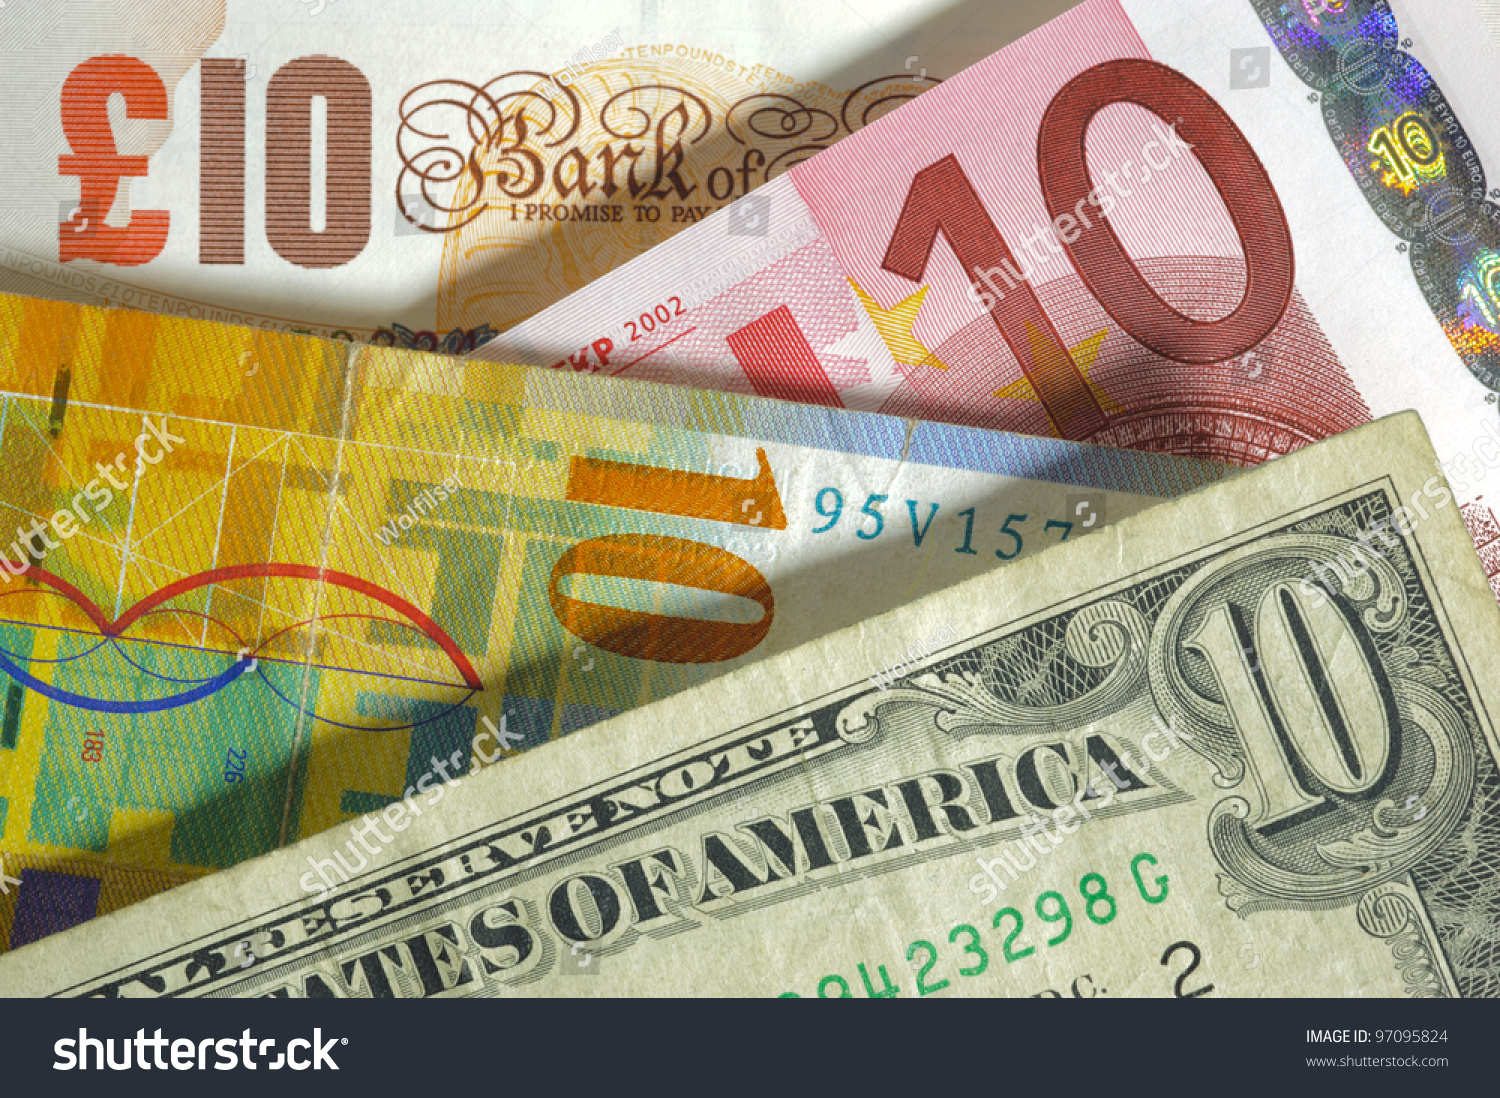 dollar, franc, euro, pound currency from usa, Europe, swiss, england #97095824